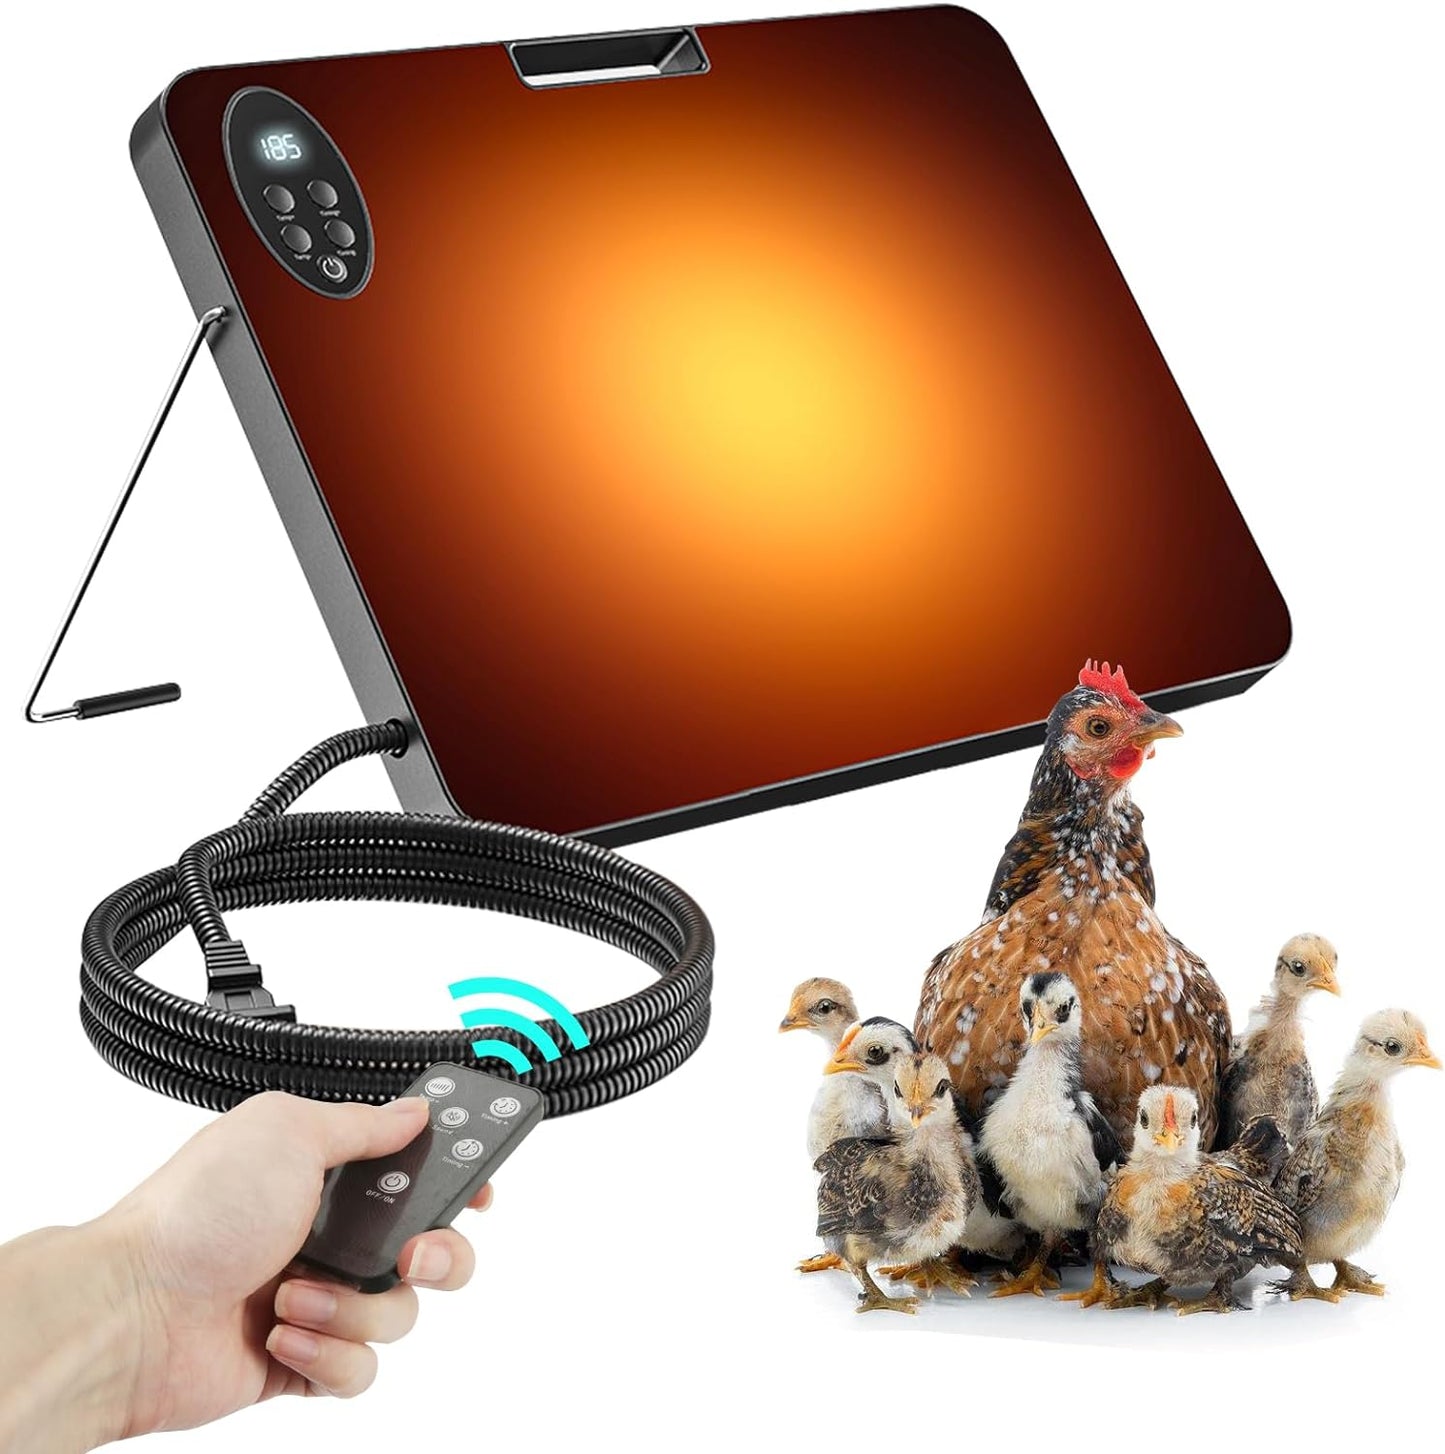 Chicken Coop Heater - 200 Watts UL Listed Chicken Heater with Anti Bite Cord, Adjustable Angle,Digital Display,Timer, 4 Ways to Use,Energy Efficient Safer Than Heat Lamps,Warm for Chicks Poultry Pets